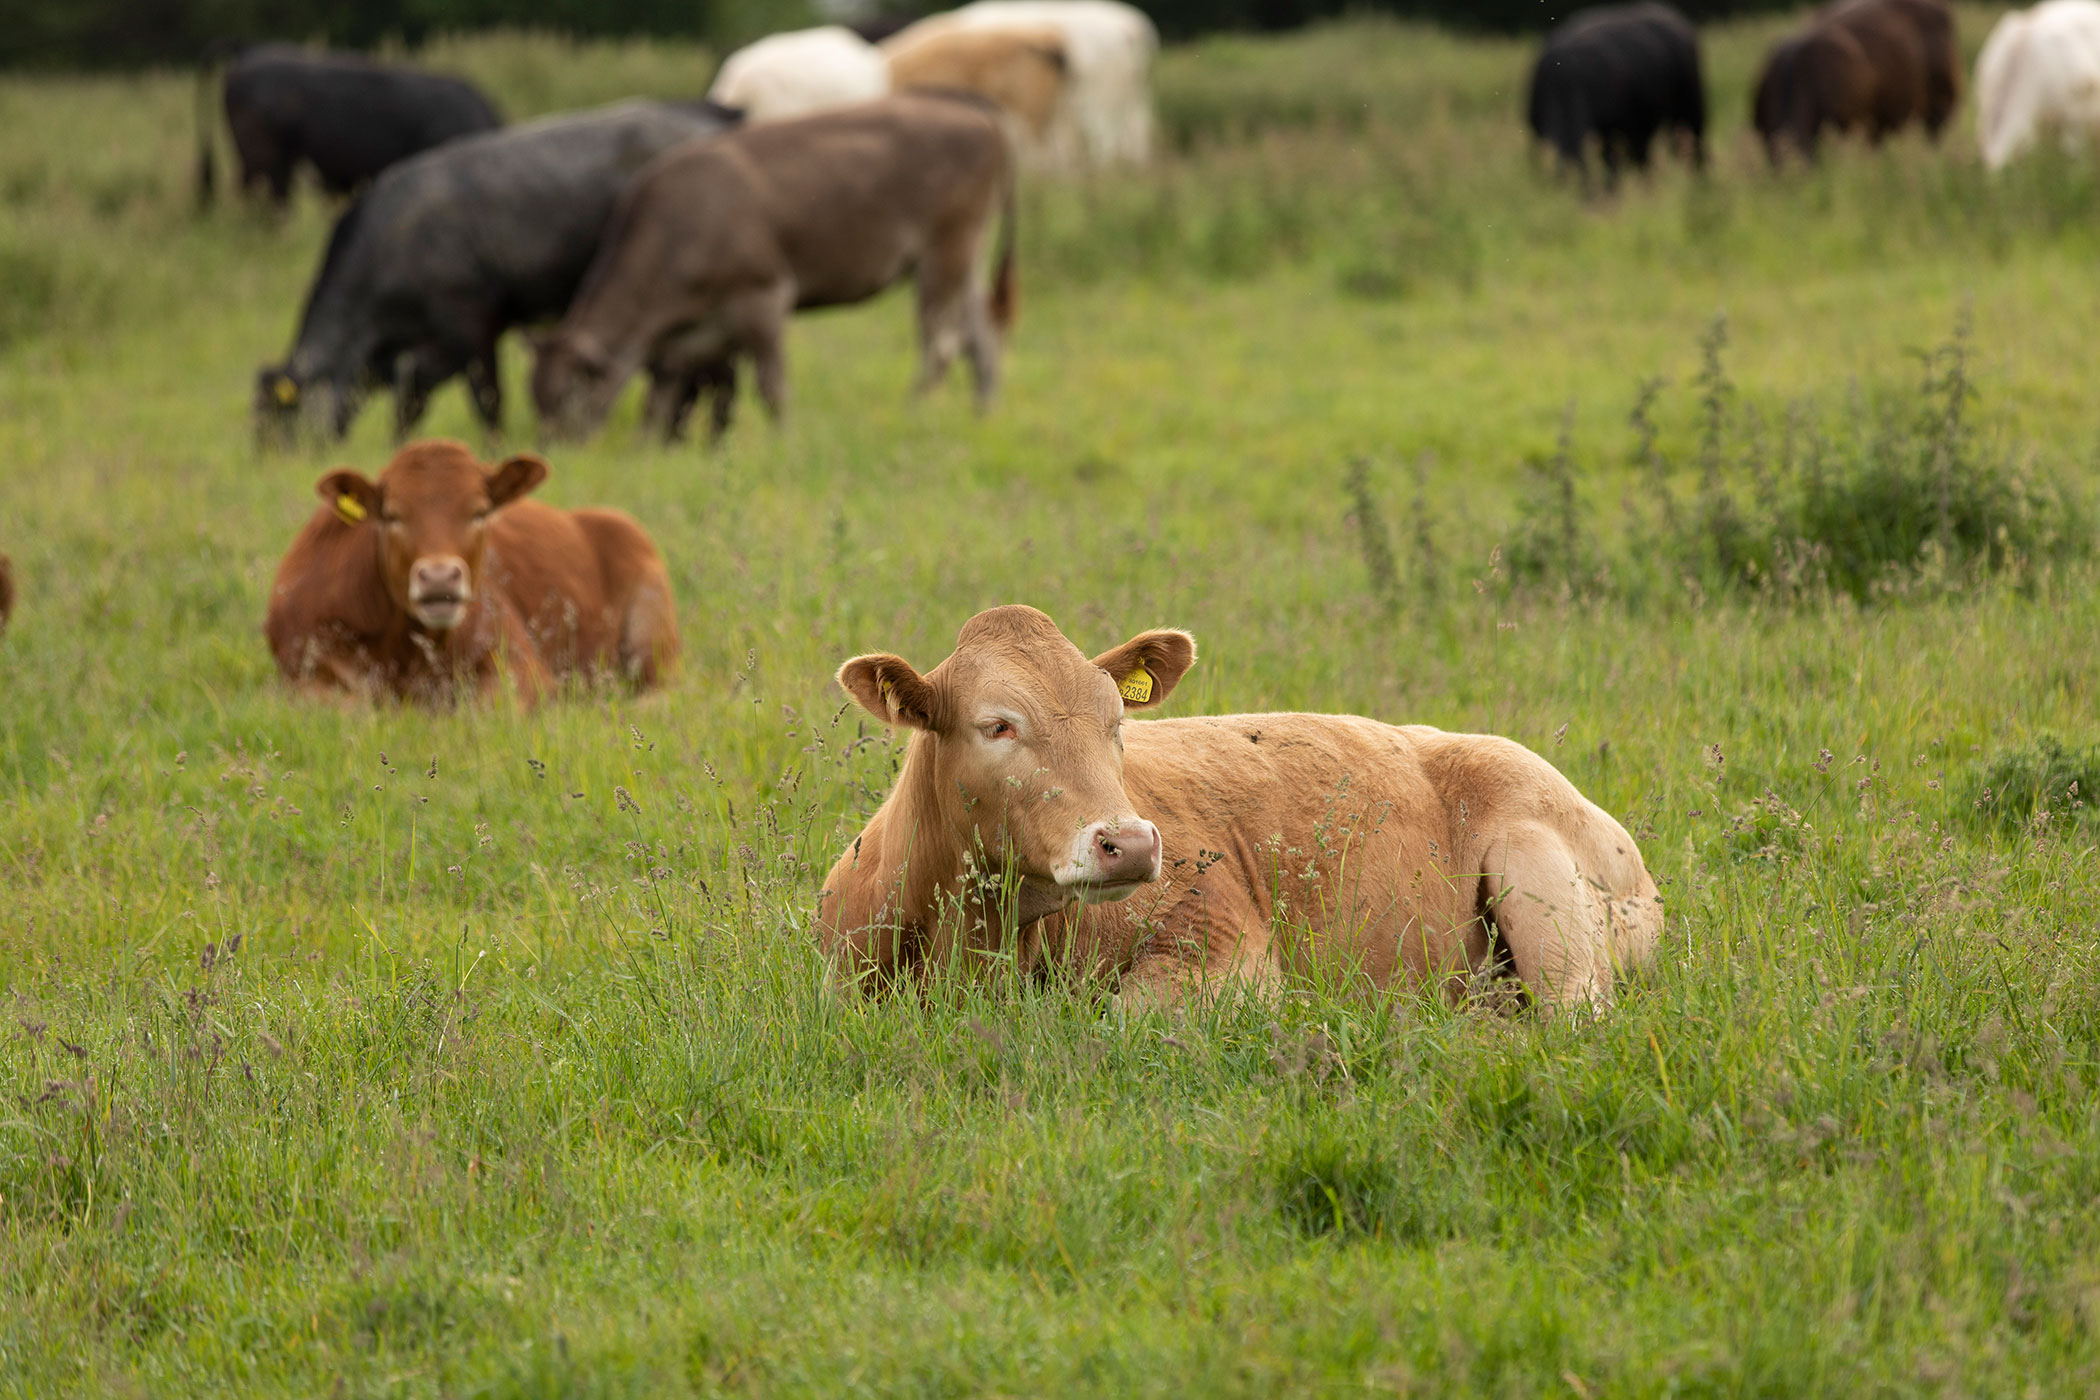  University of Georgia study finds antibiotic-resistant bacteria in cattle 